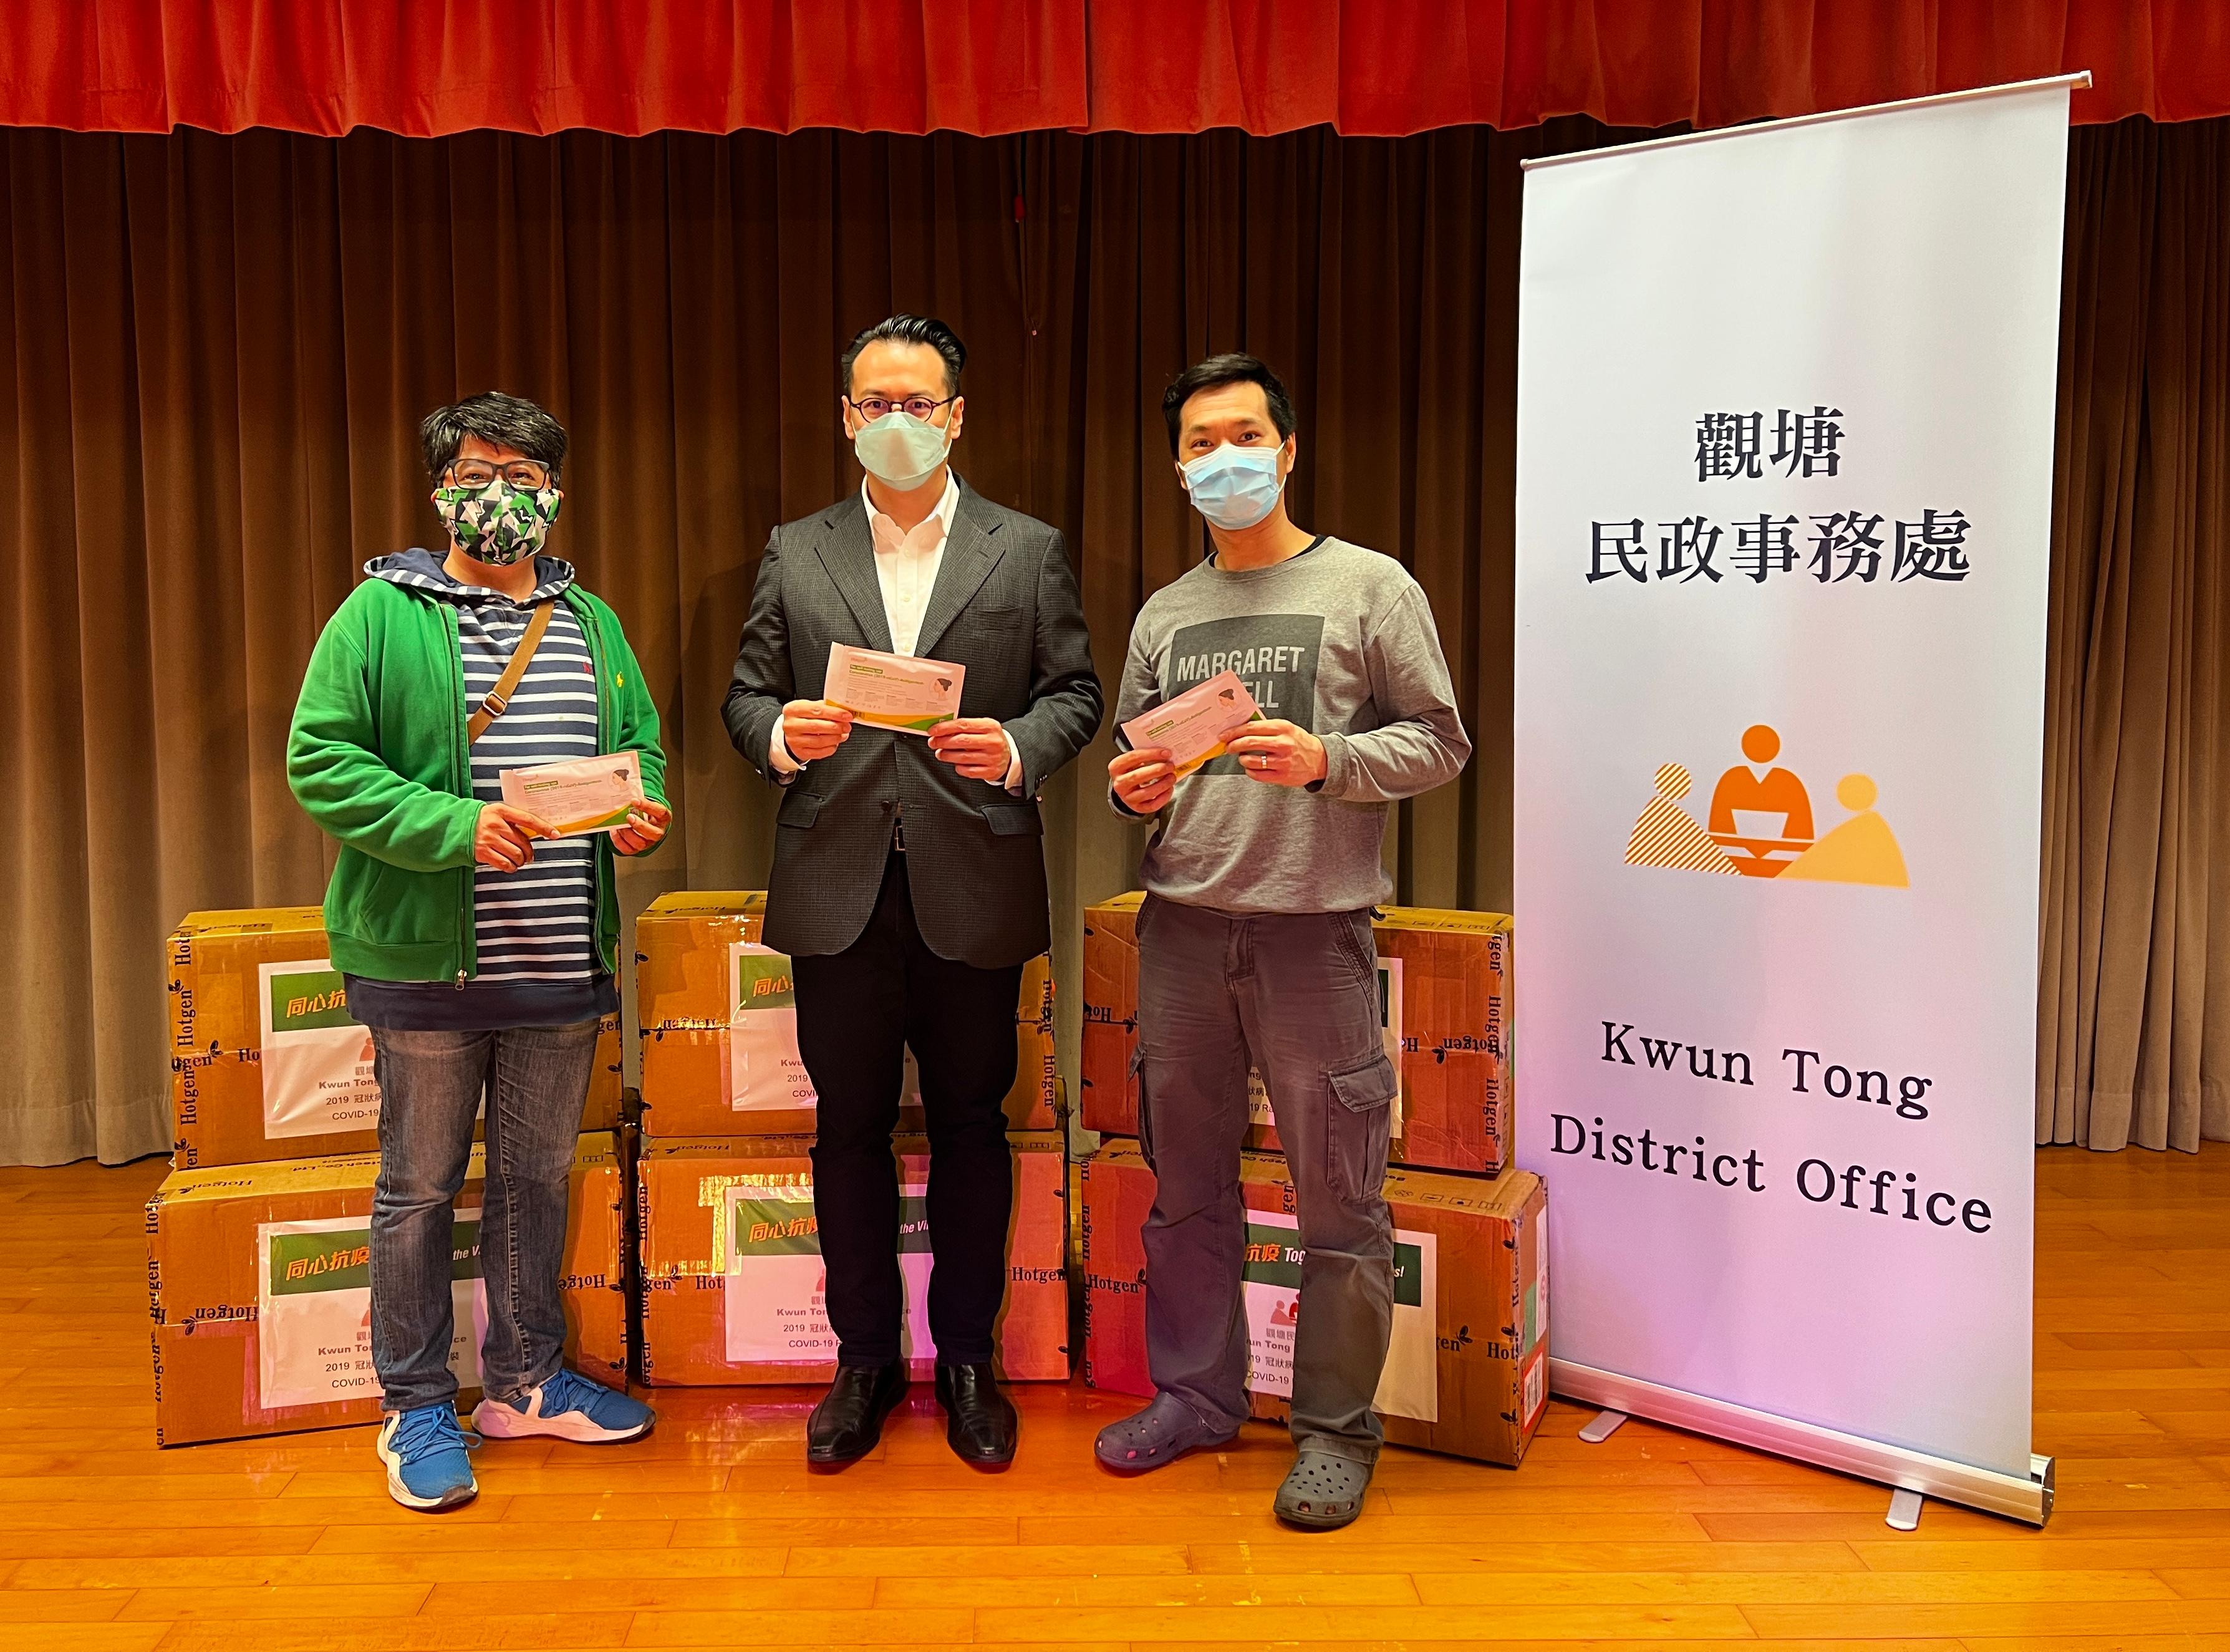 The Kwun Tong District Office today (March 4) distributed COVID-19 rapid test kits to households, cleansing workers and property management staff living and working in Lok Nga Court for voluntary testing through the property management company.